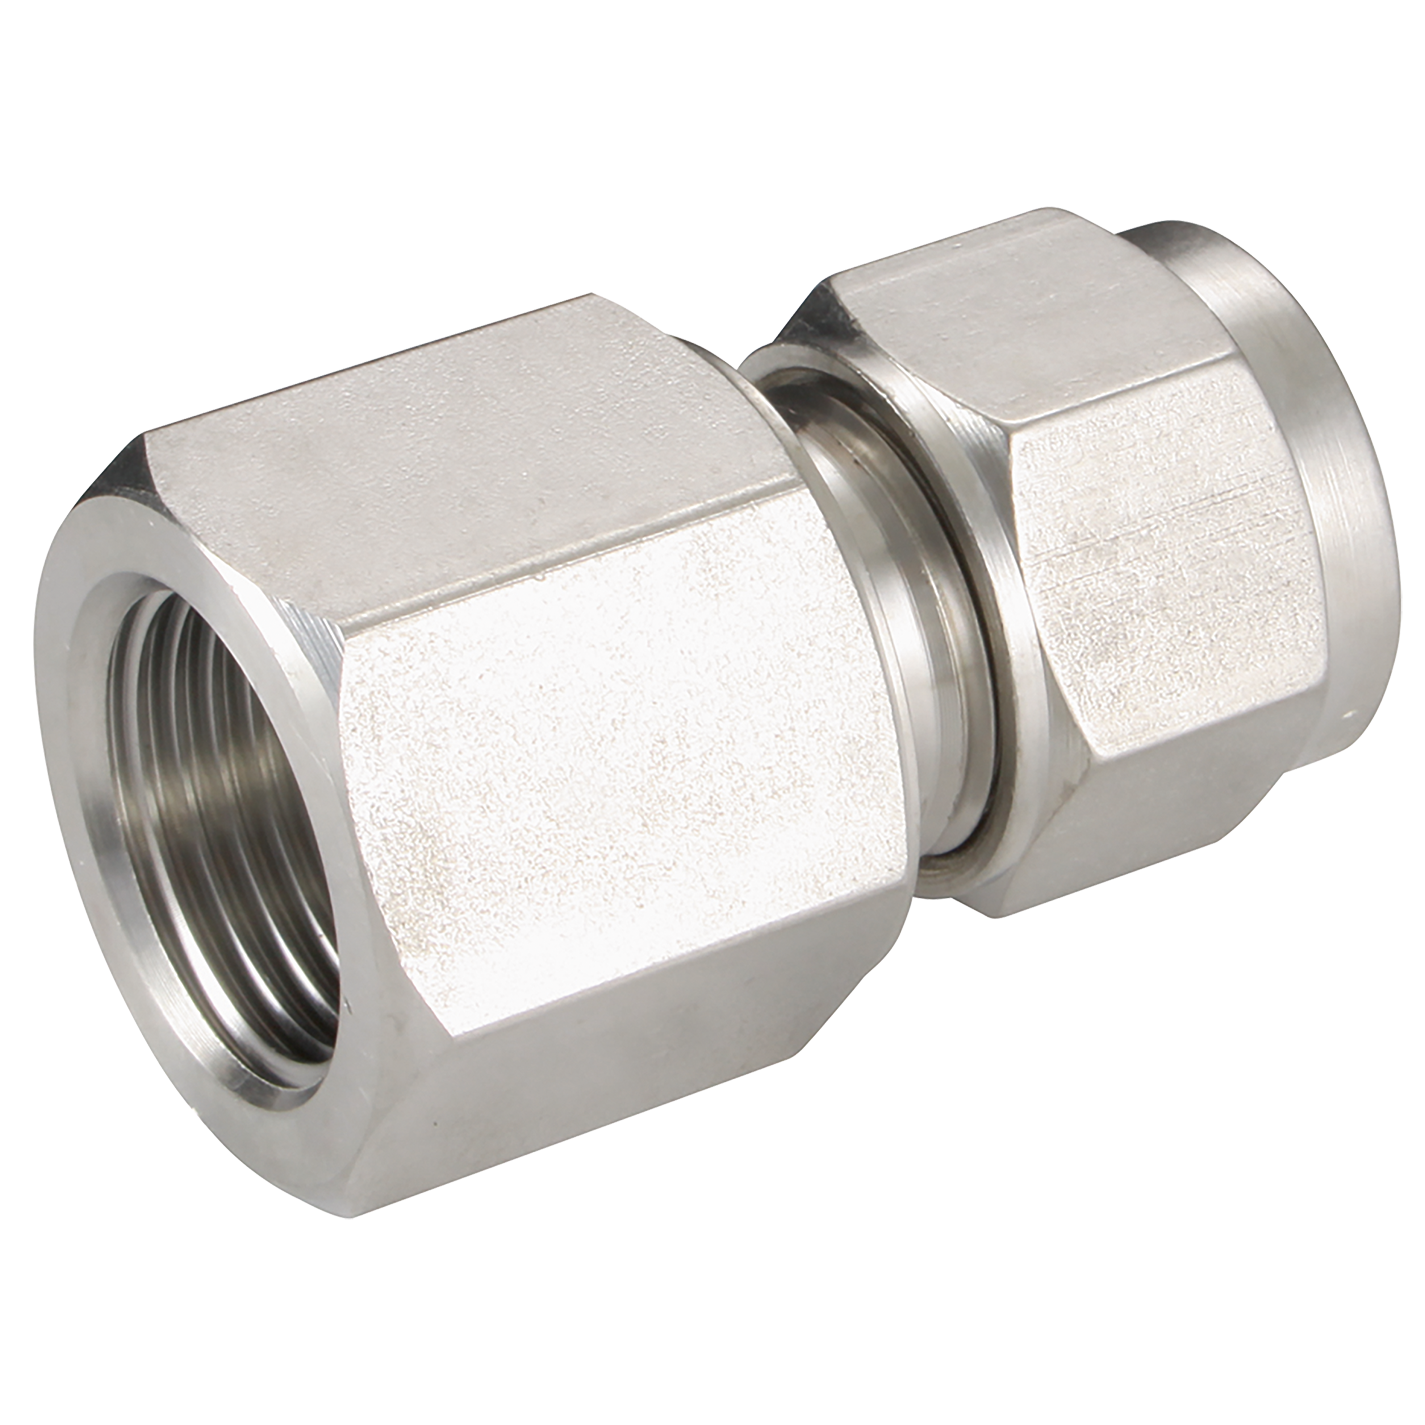 FEMALE CONNECTOR 12 OD 3/8 BSPP